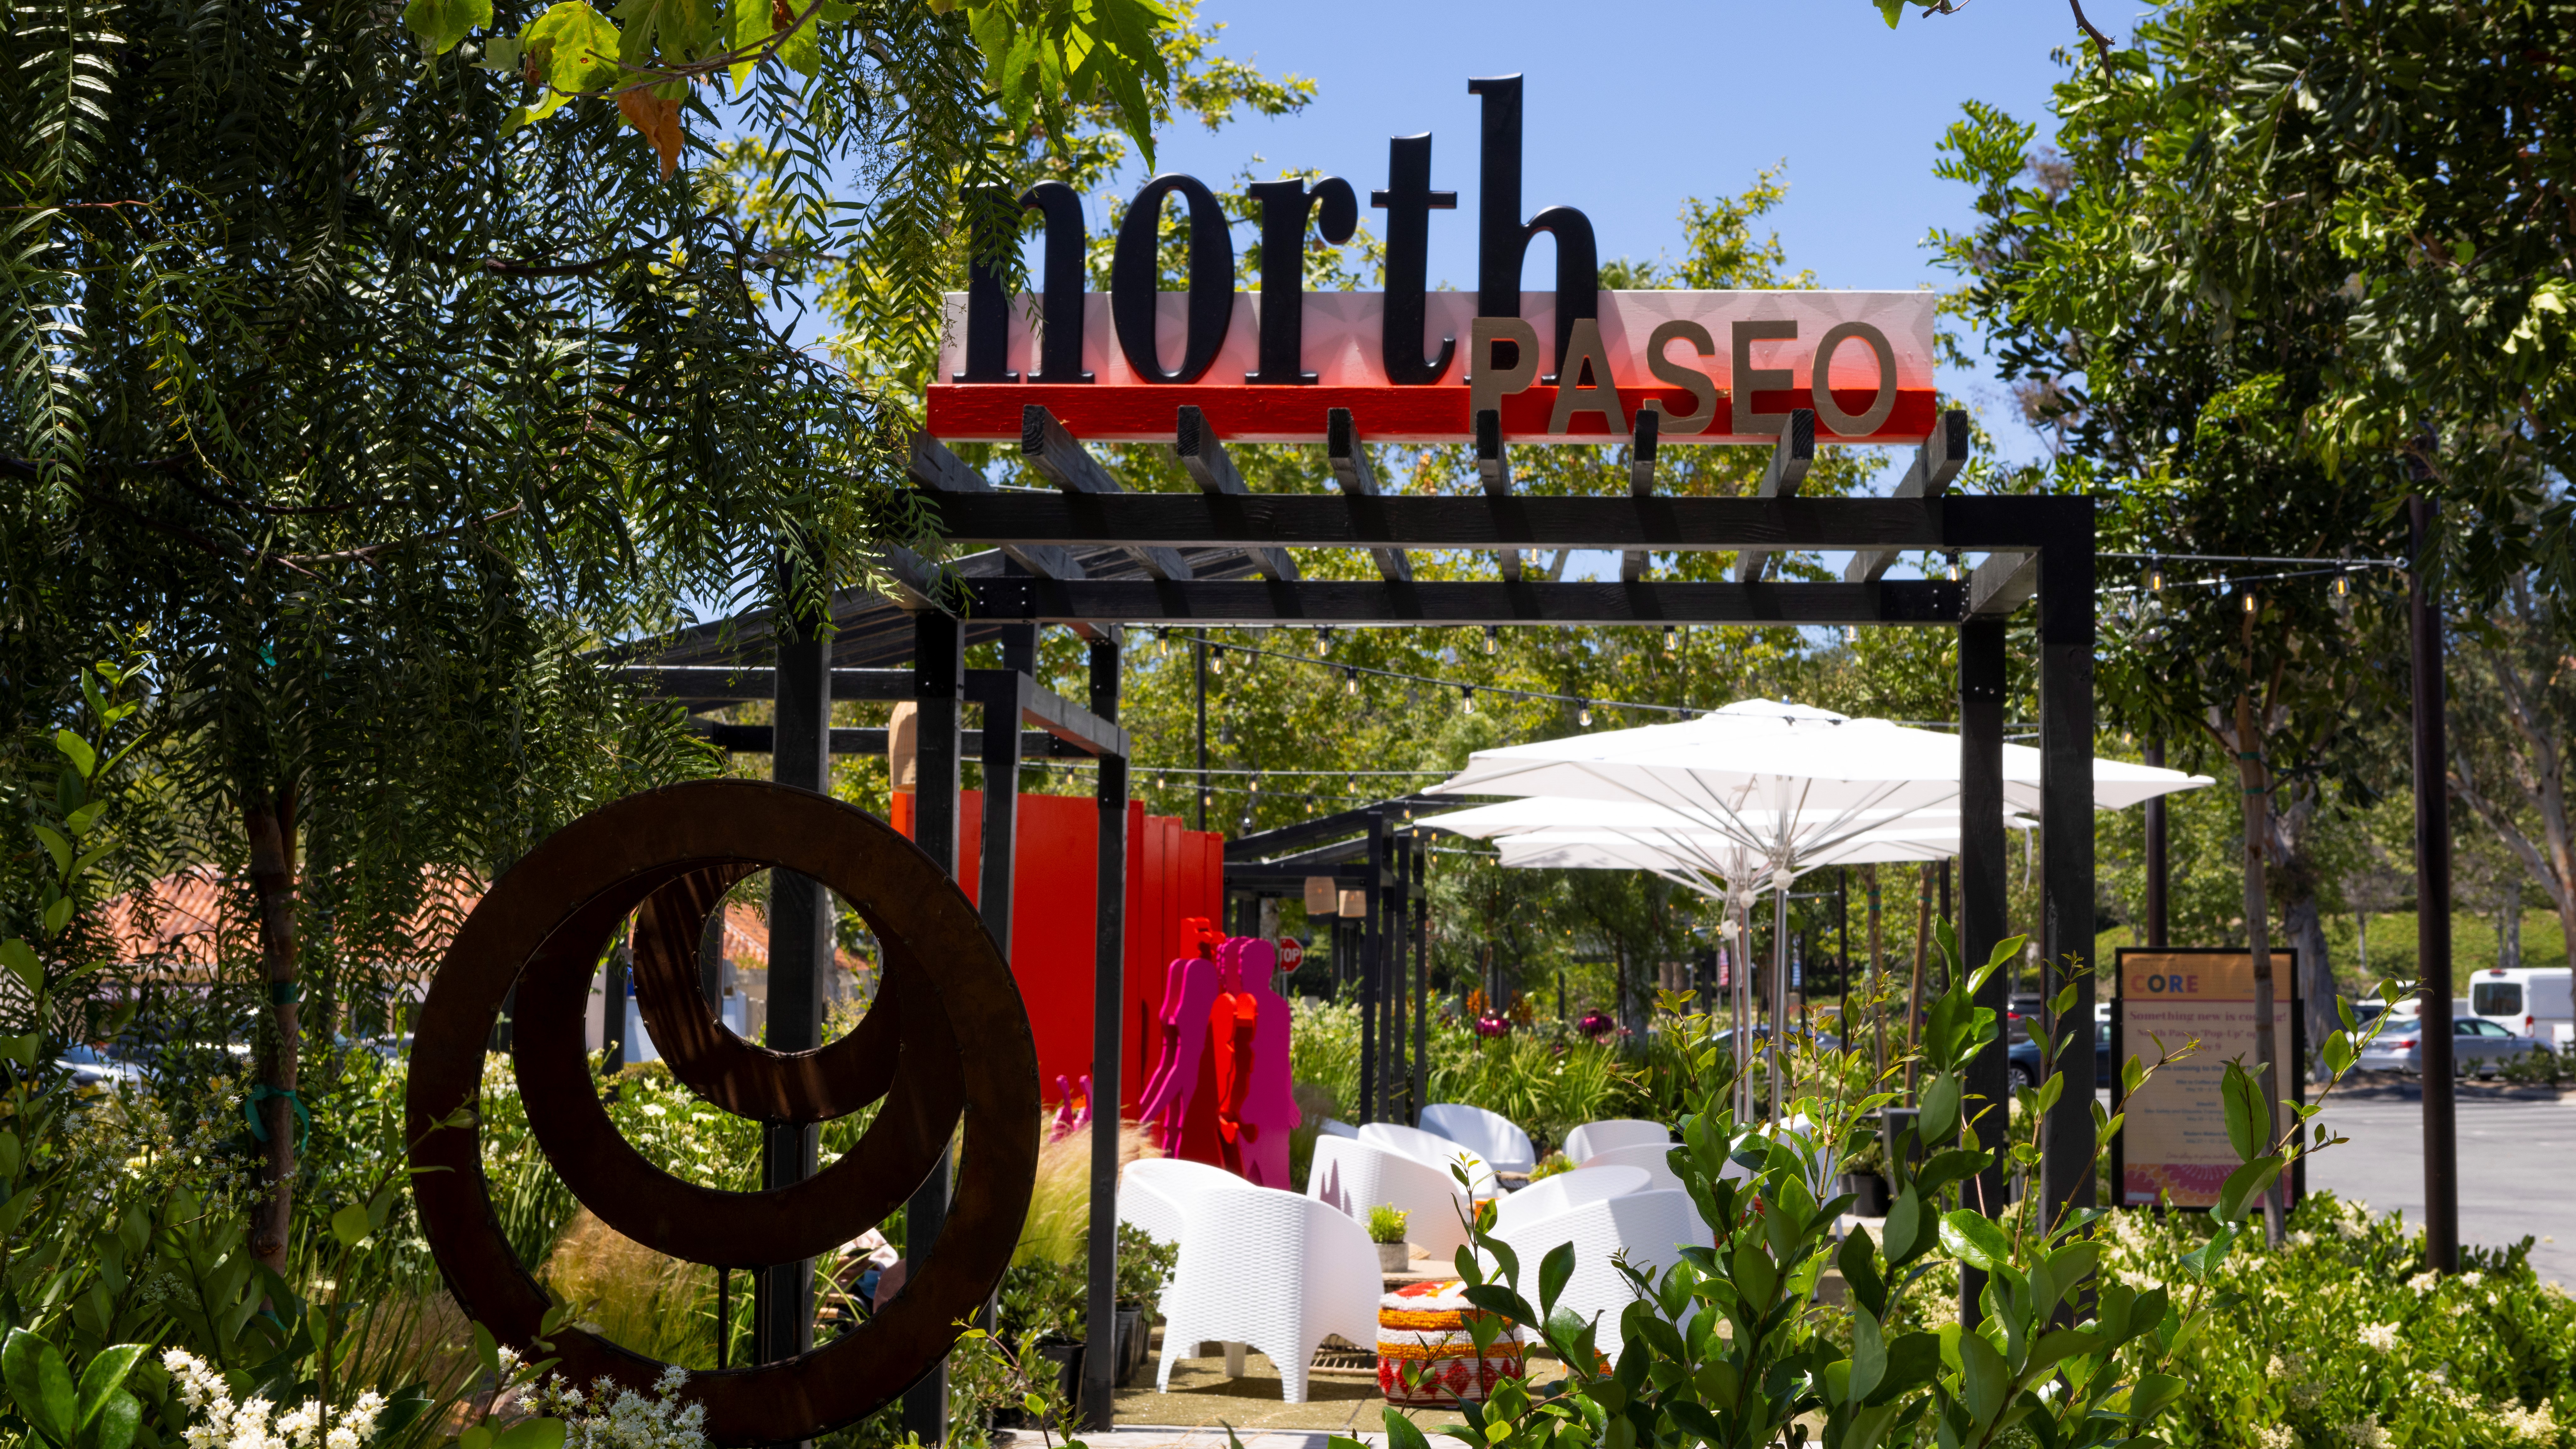 North Paseo entry way with seating and greenery